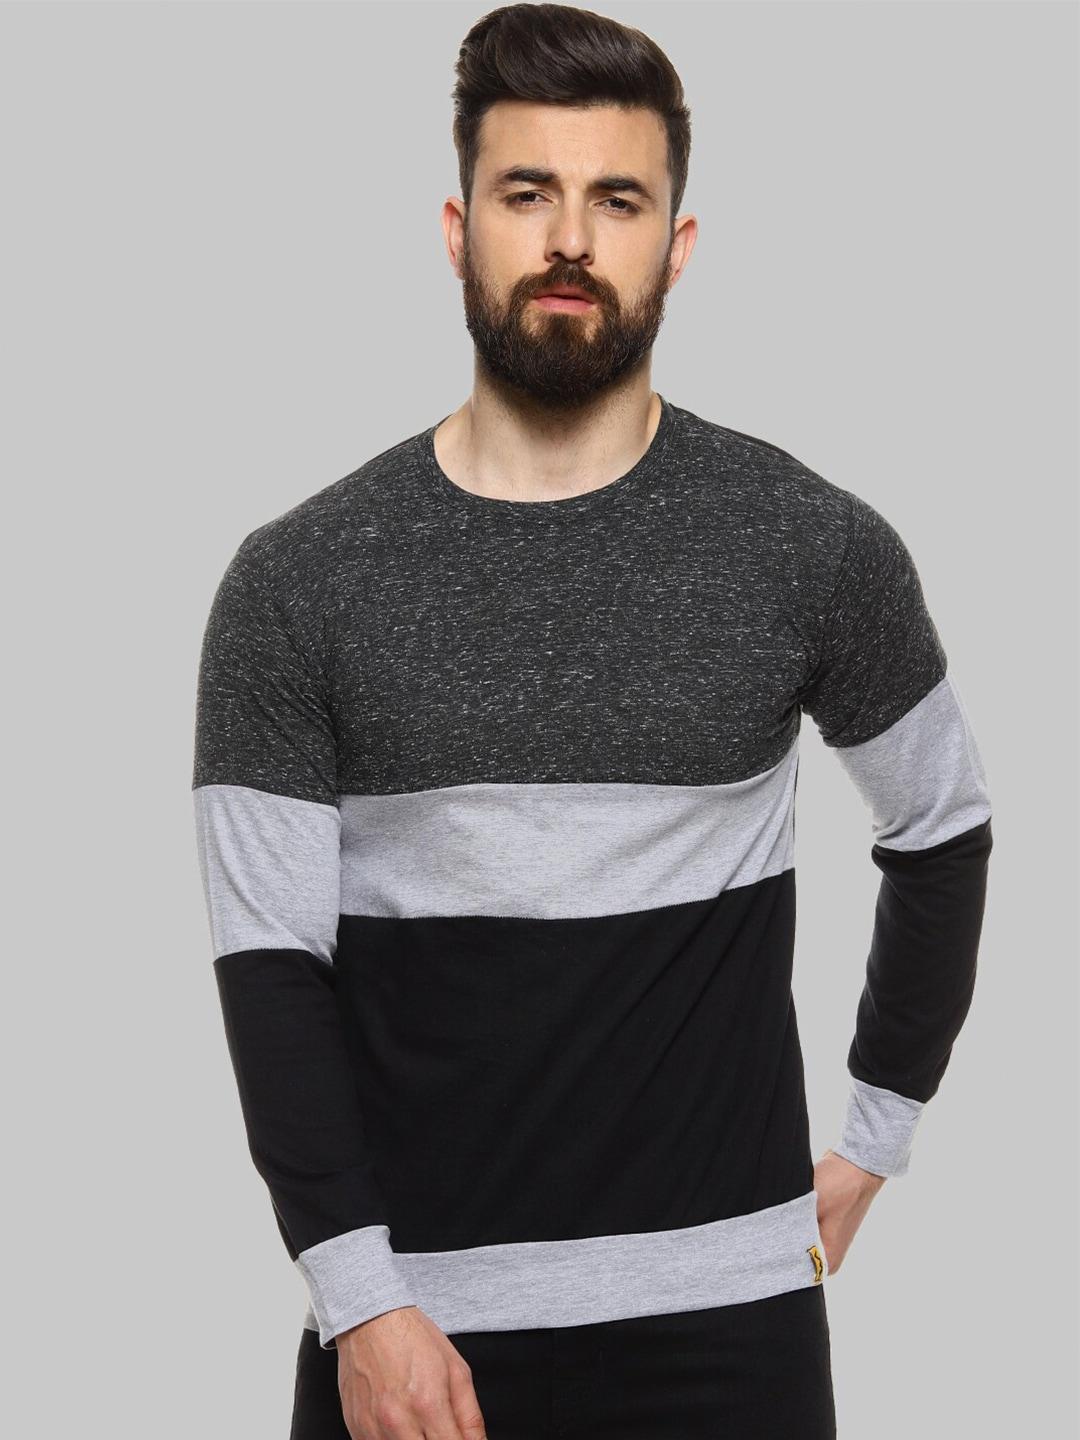 campus-sutra-colourblocked-round-neck-long-sleeves-casual-t-shirt